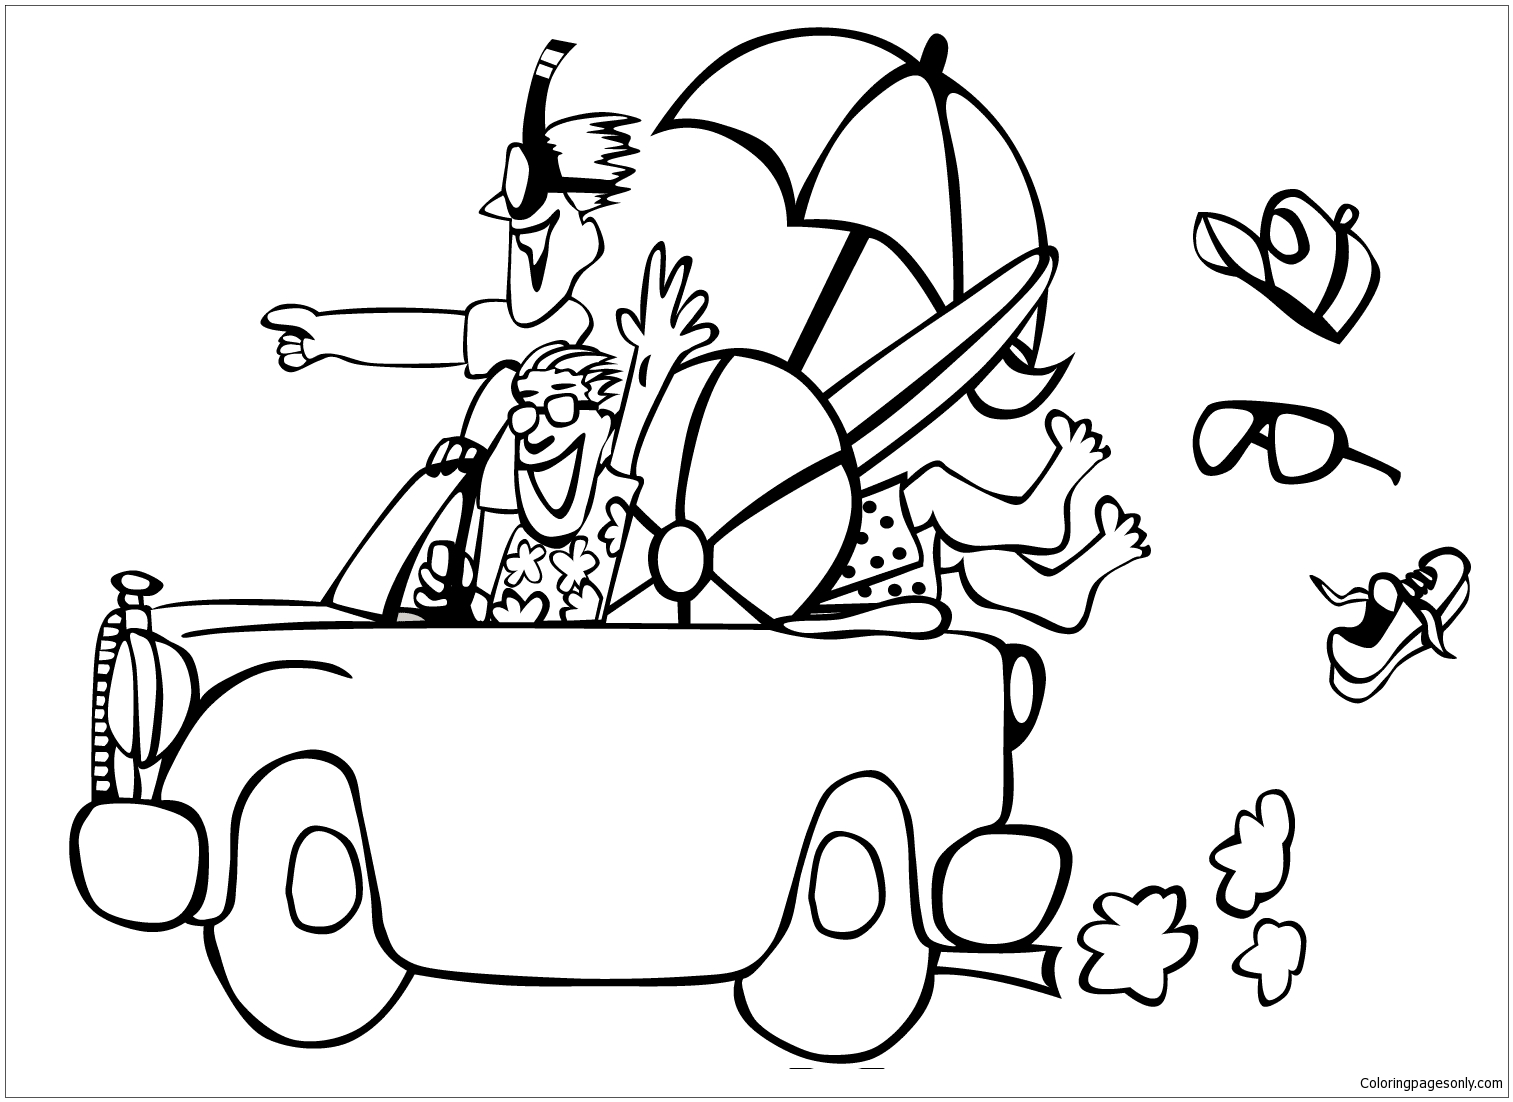 Go To The Beach Coloring Pages